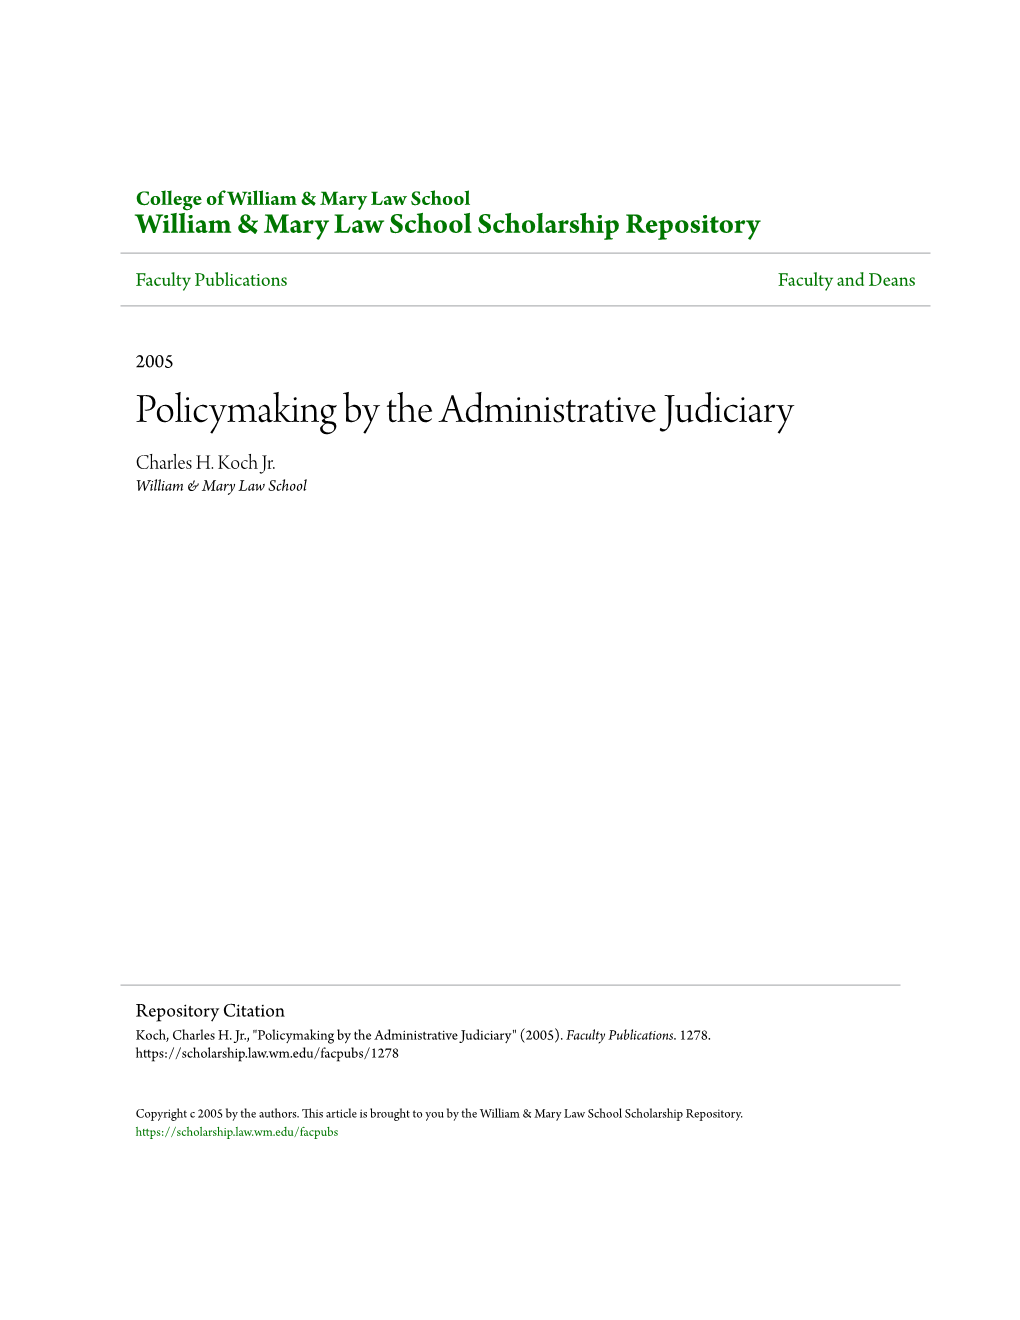 Policymaking by the Administrative Judiciary Charles H